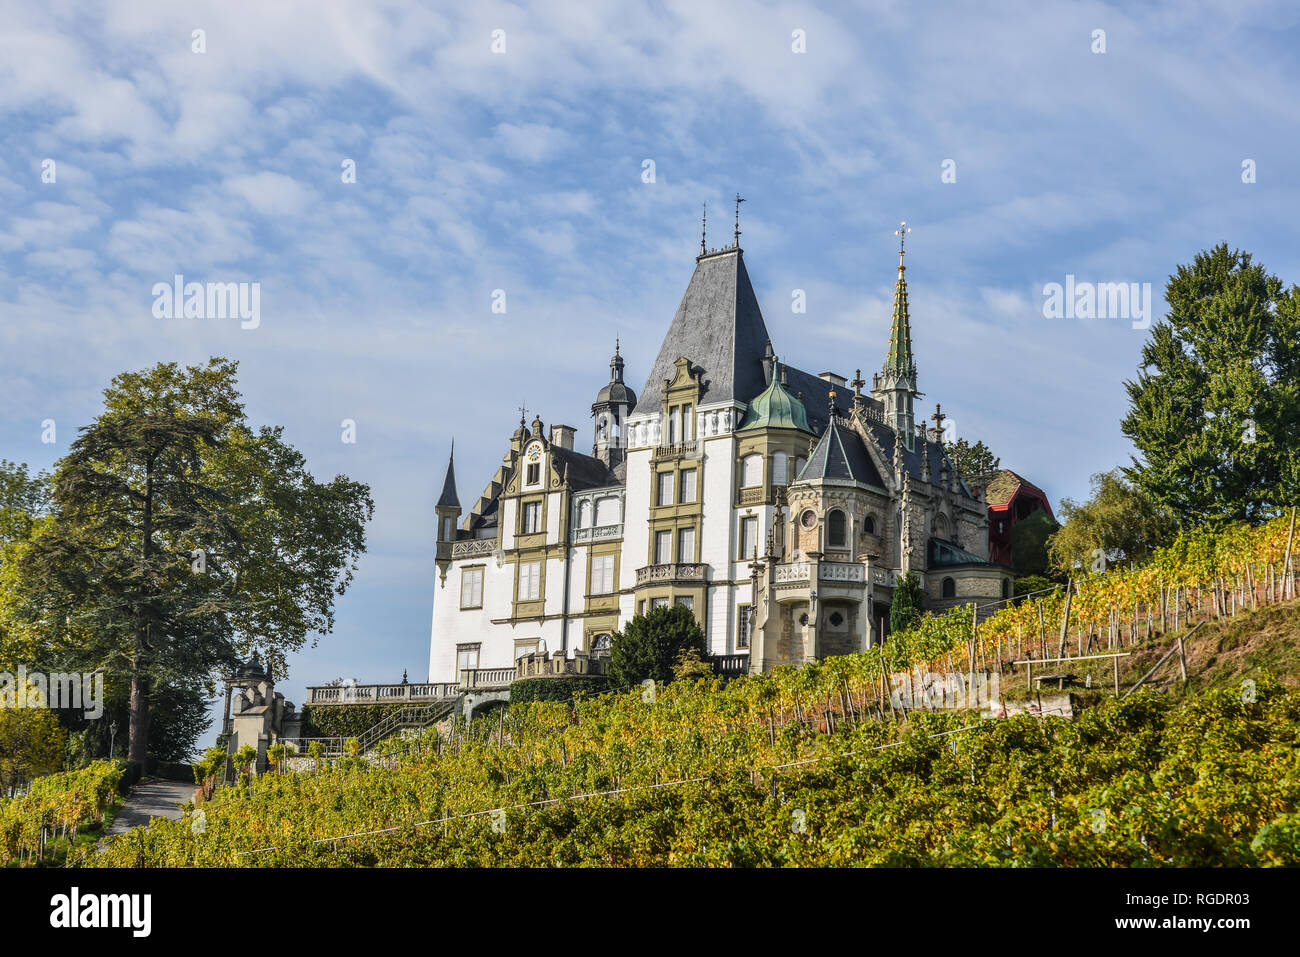 Meggenhorn Castle with vineyard in Lucerne, Switzerland. The castle is a Swiss heritage site of national significance. Stock Photo